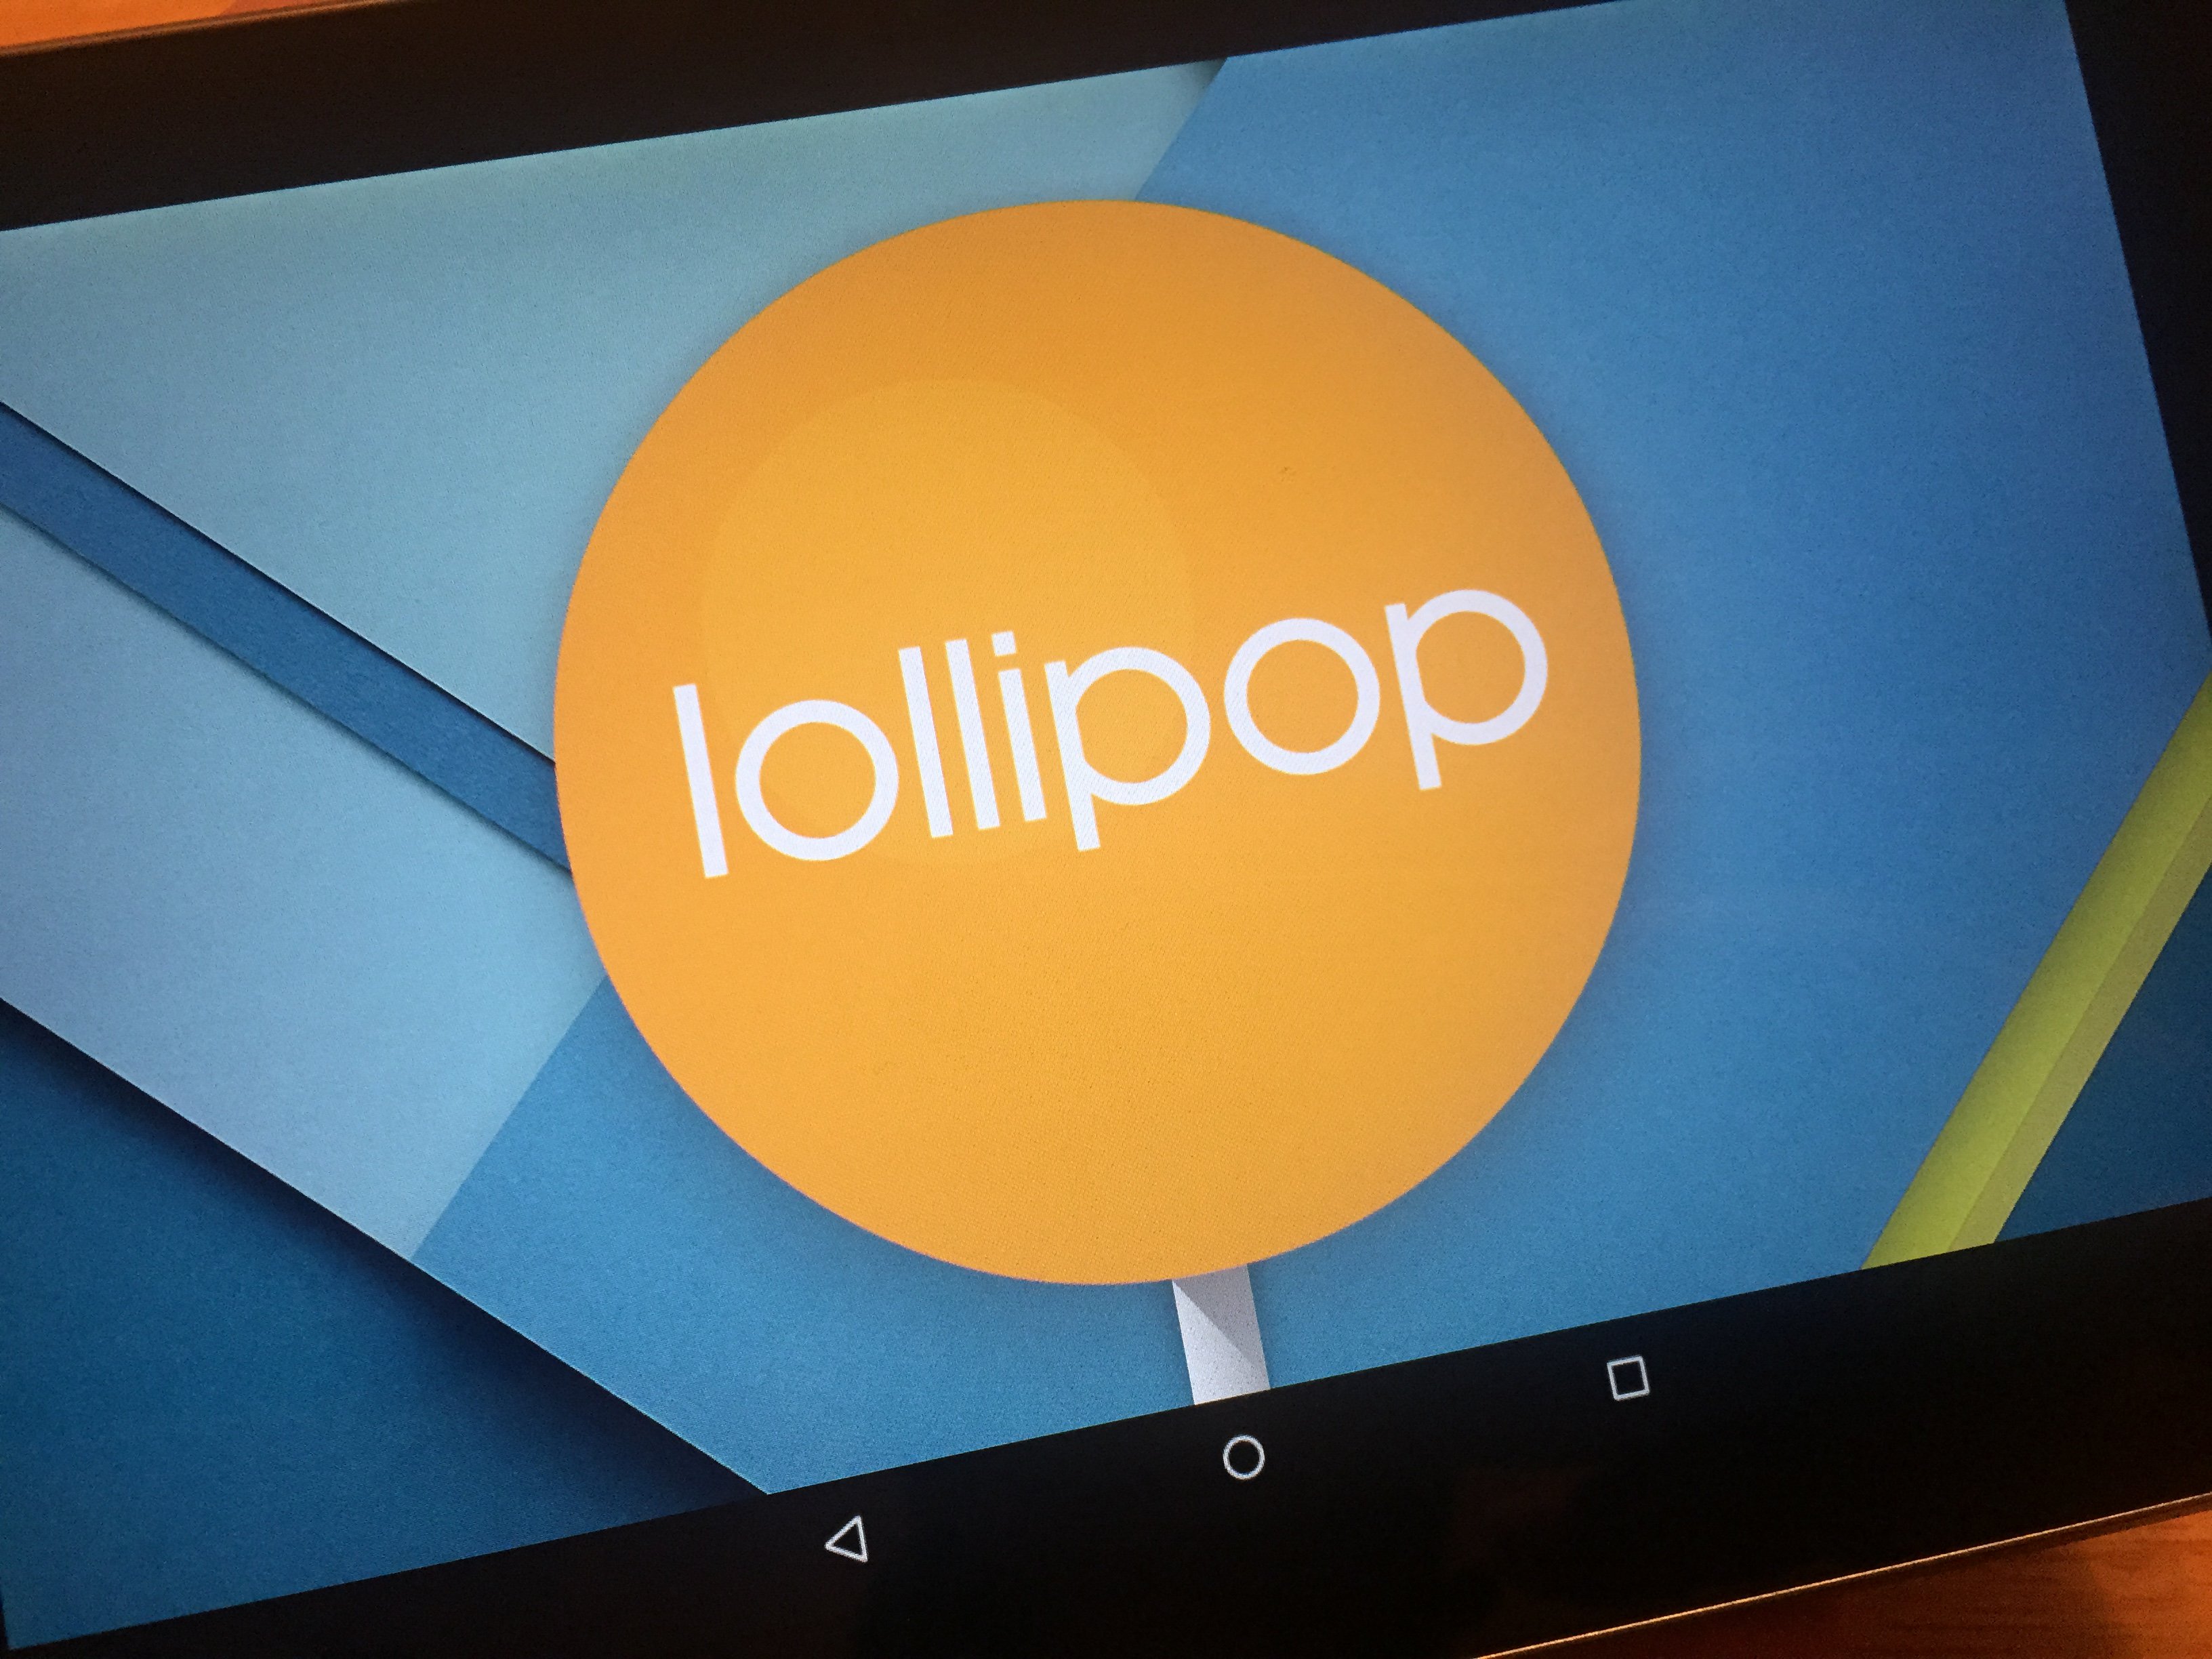 Here's what you need to know about the Nexus 7 2013 Android 5.0.2 update.